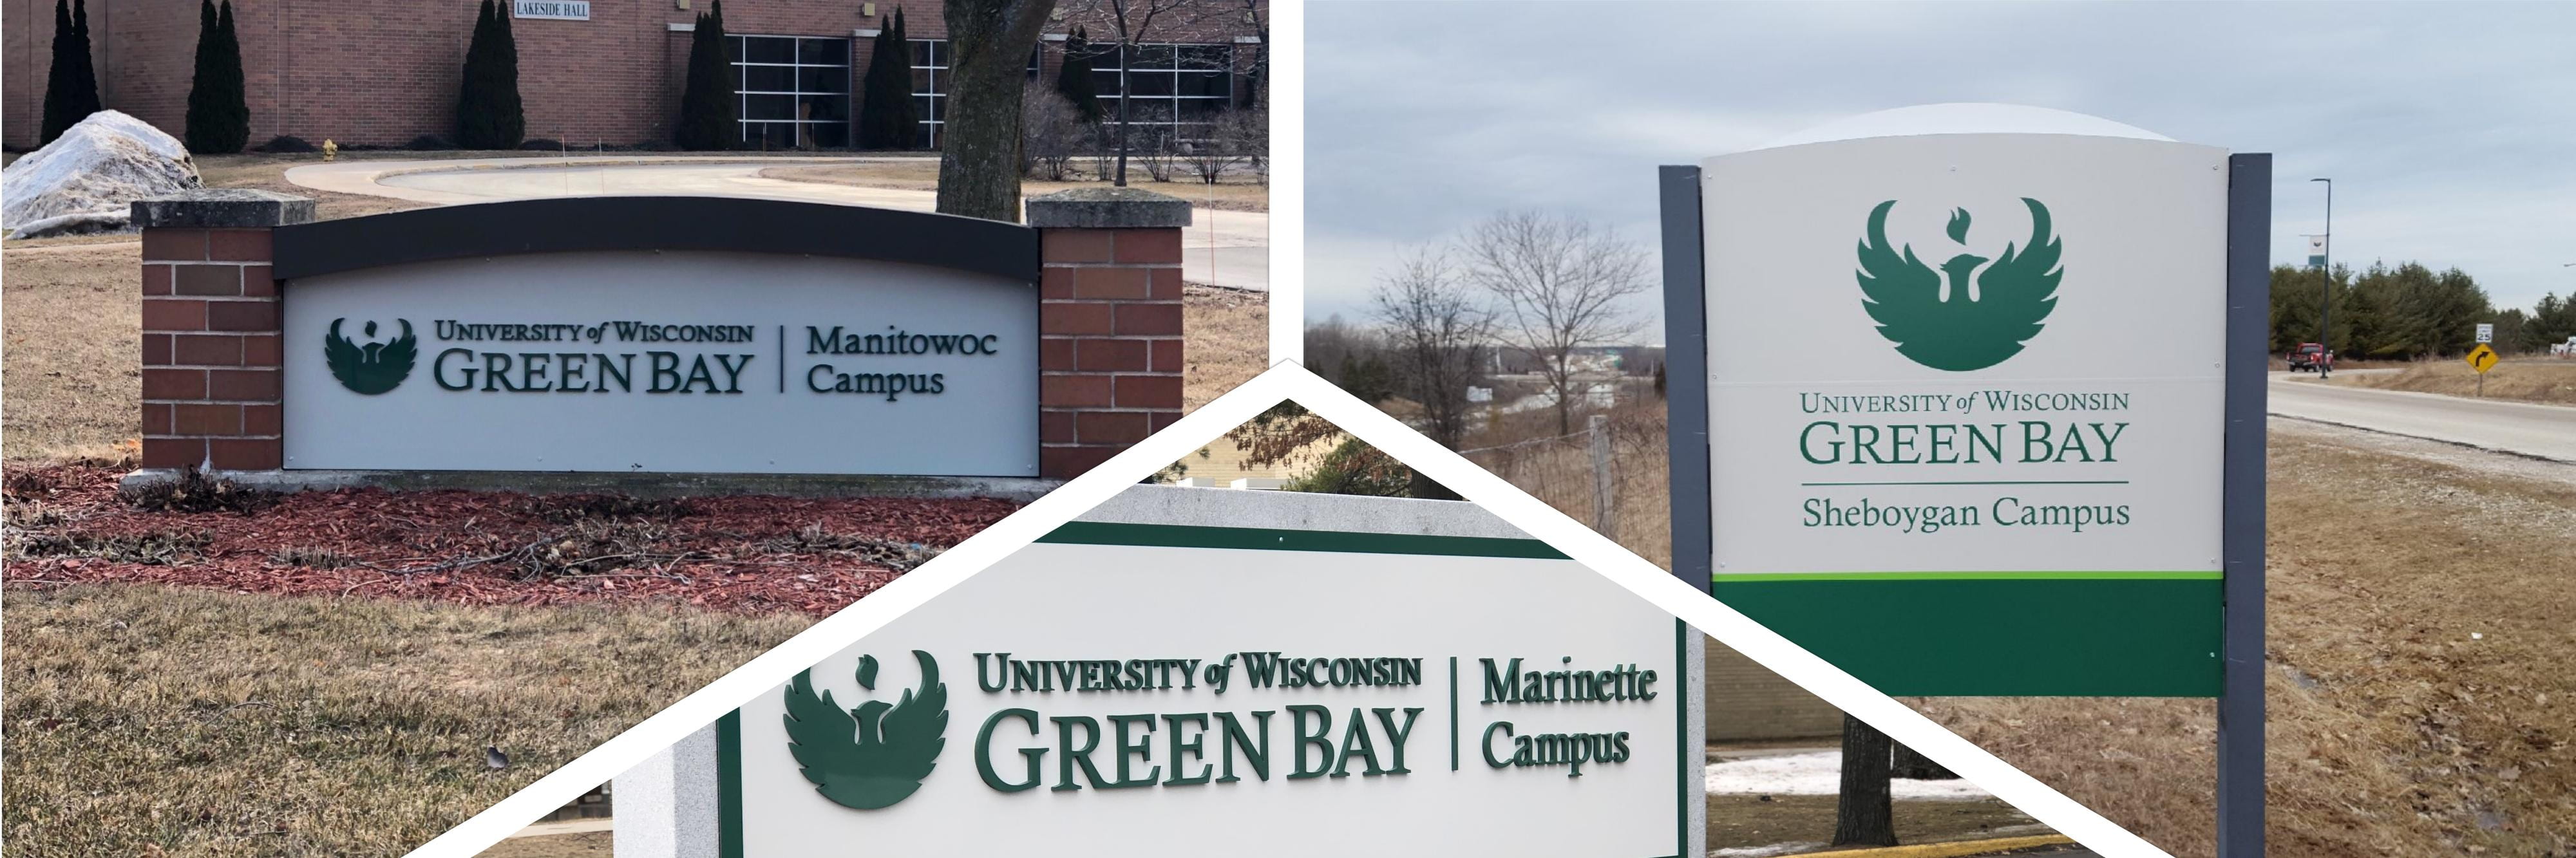 Branch campus signage collage